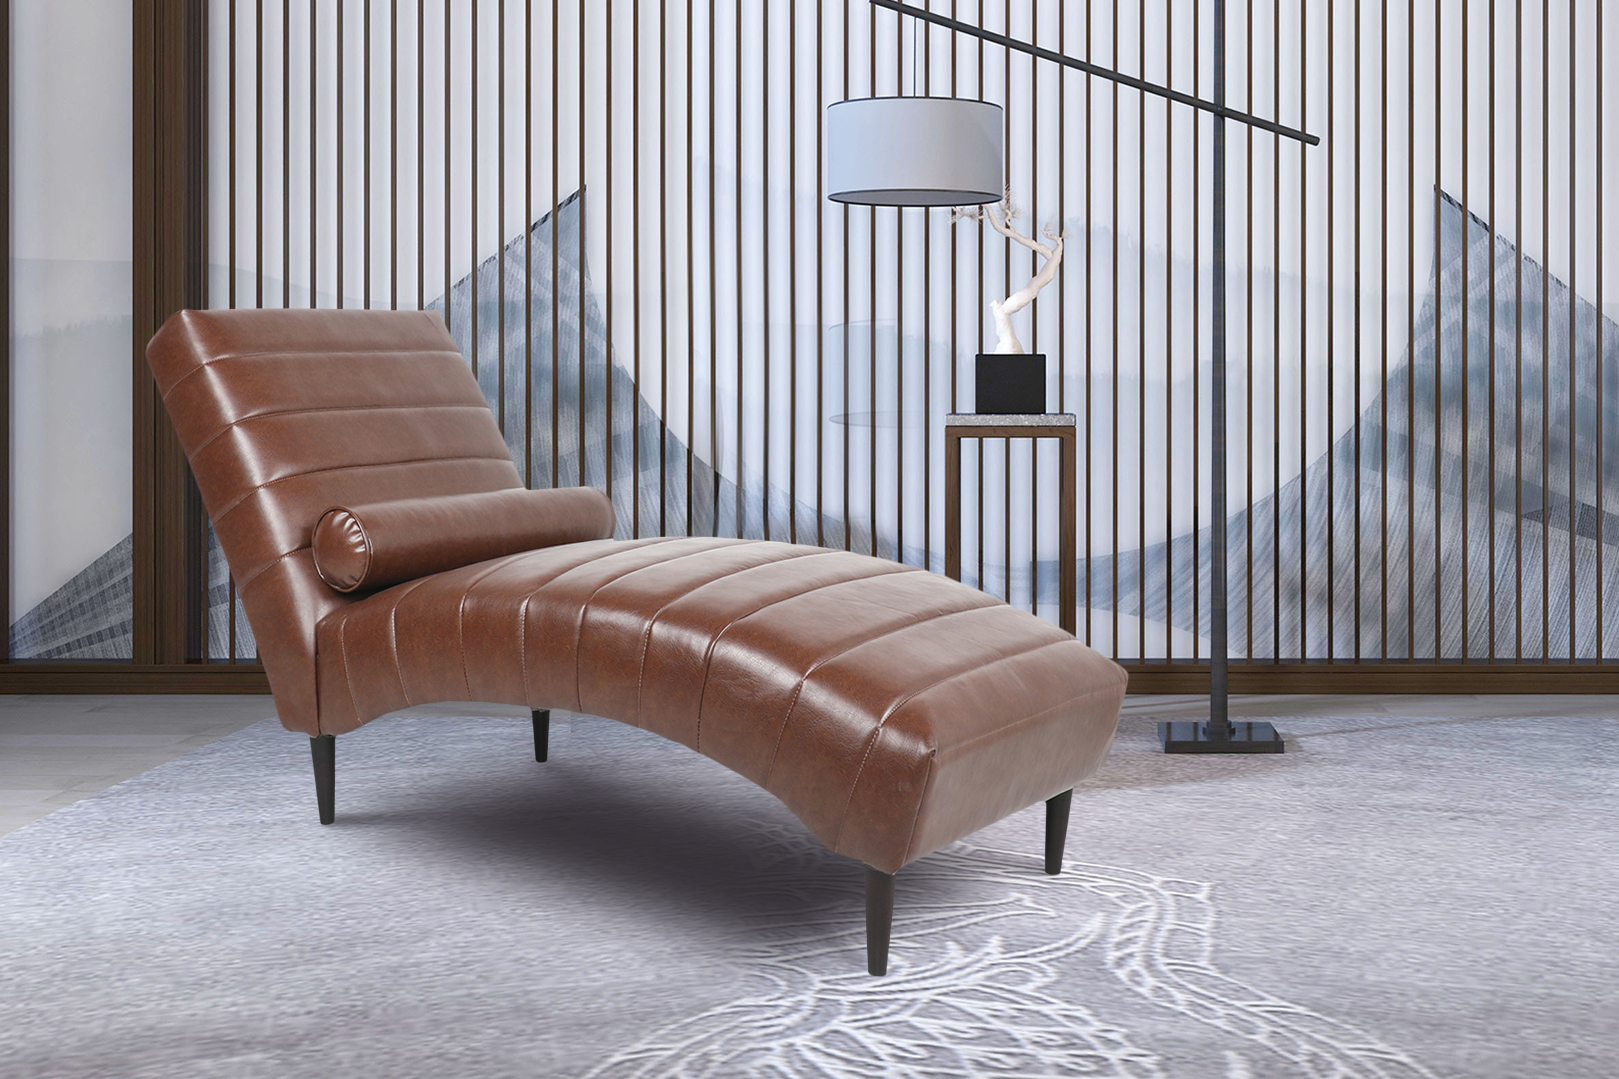 Modem Chaise Lounge For Bedroom Office Living Room With Luxury PU-Boyel Living